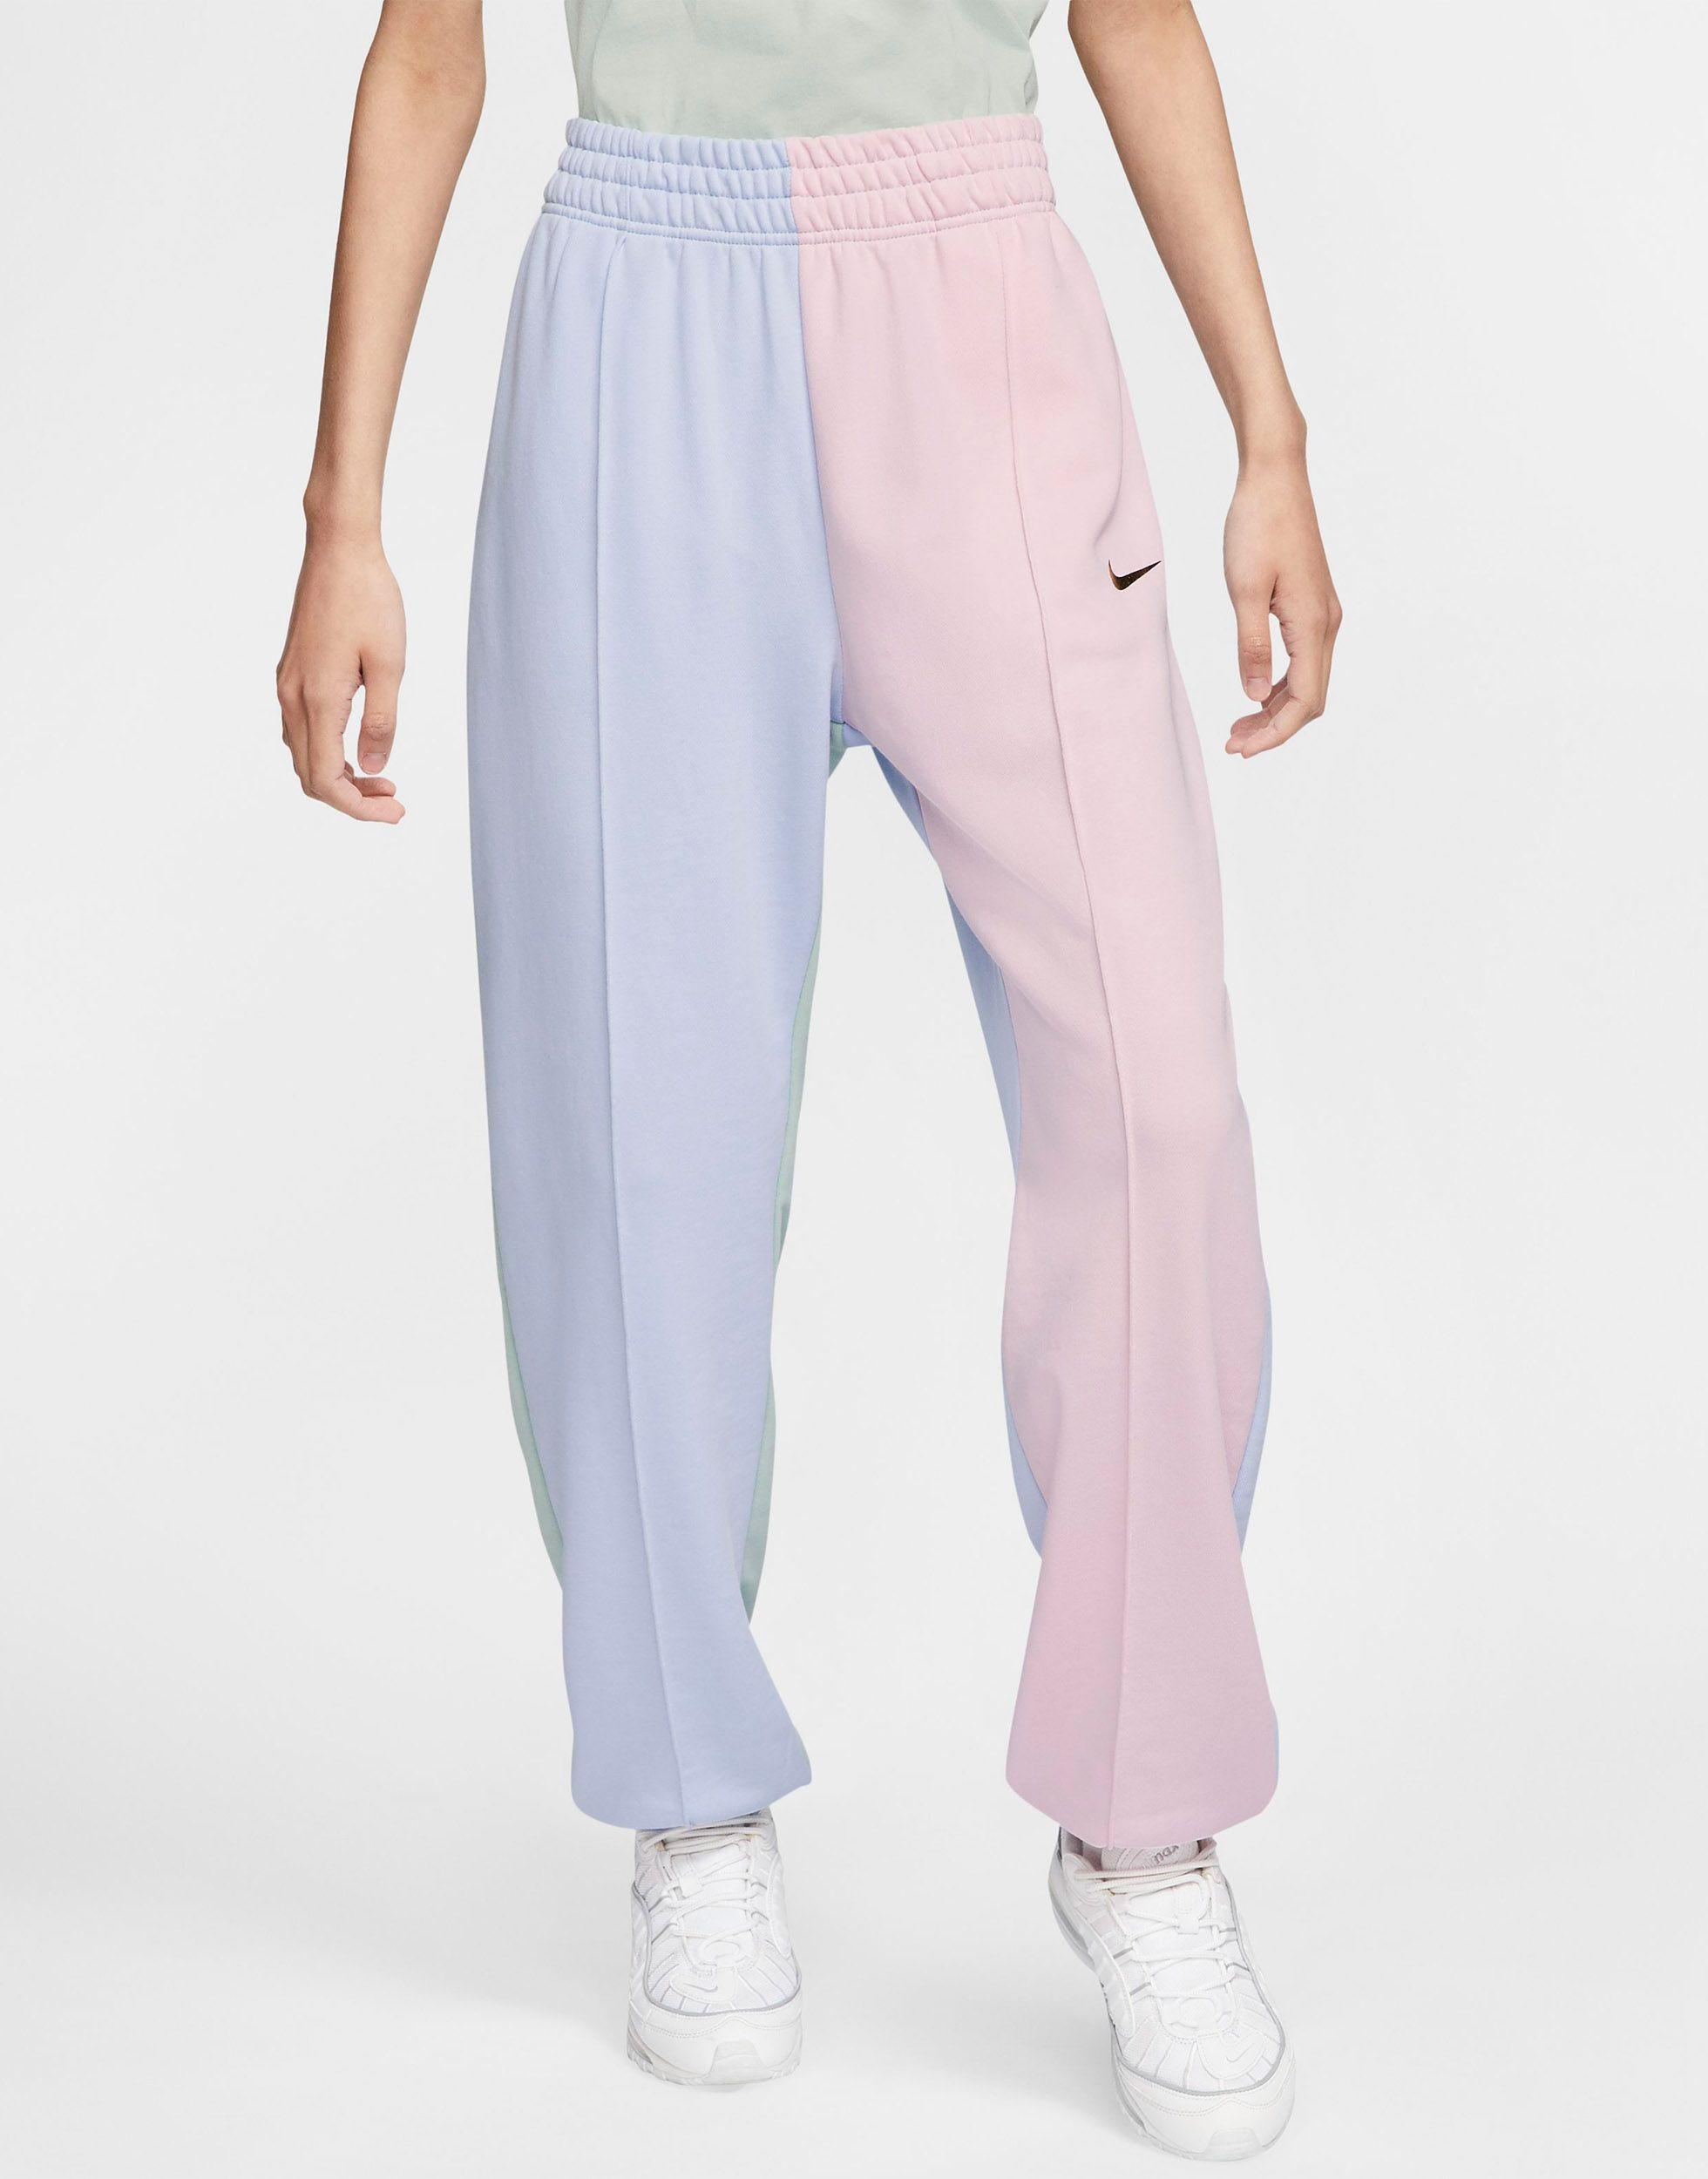 Nike Jogging Femme Pastel Cheap Sale, SAVE 59% - thecocktail-clinic.com